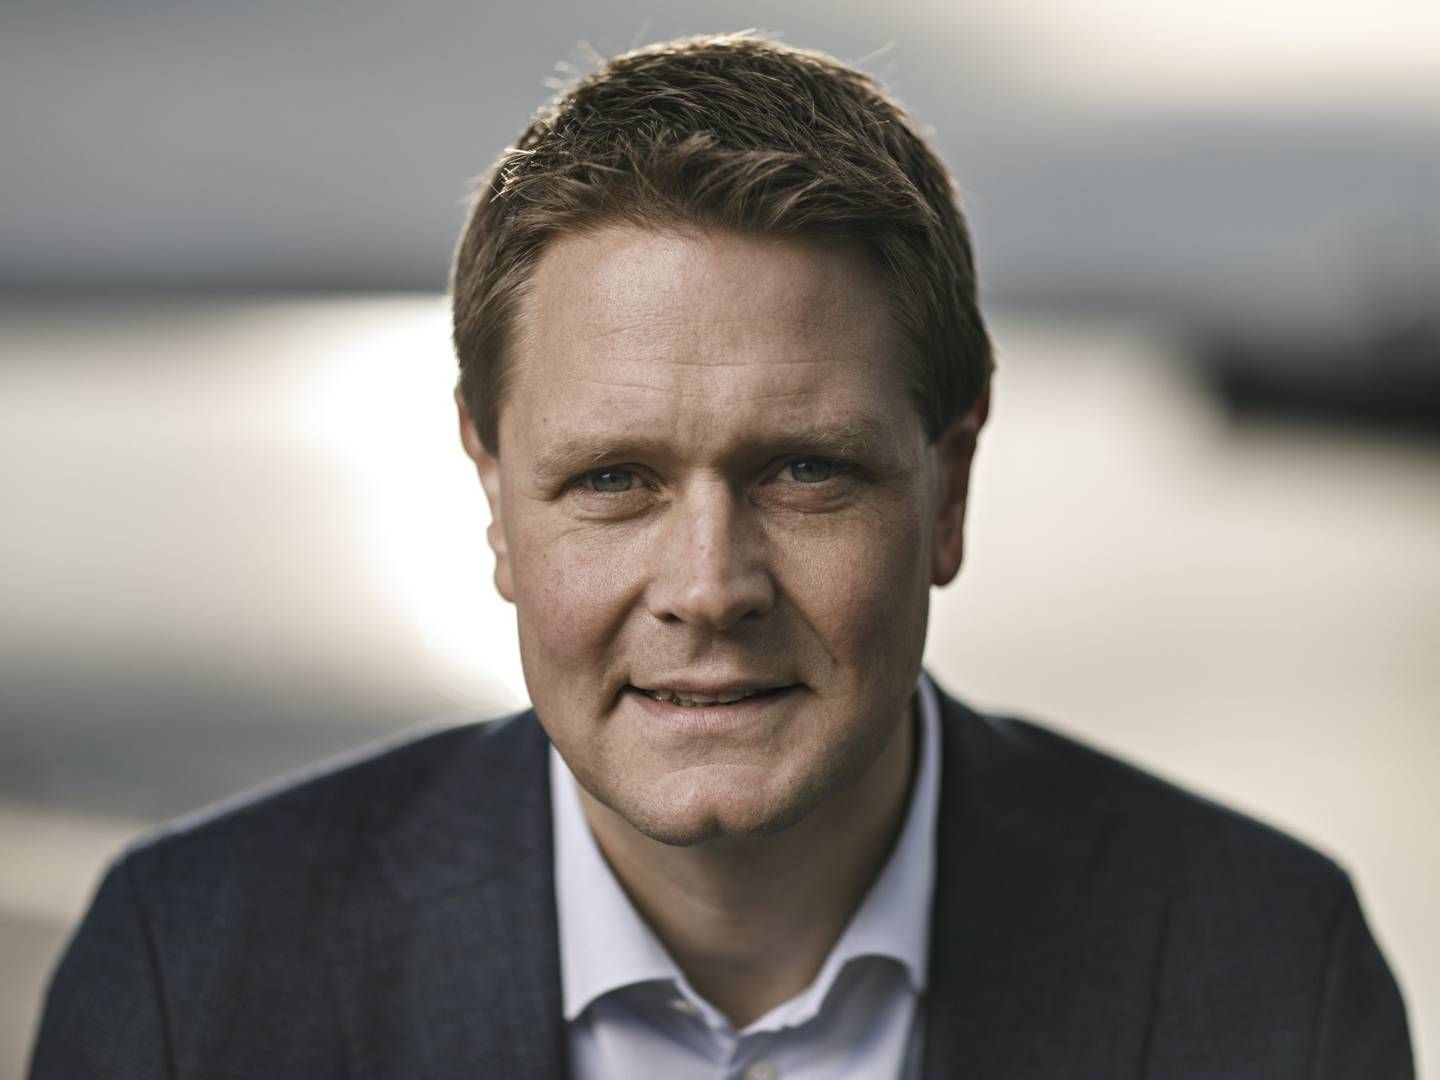 Harald Solberg laughs out loud when asked if it will be a "short trip" to Norsk Industri before he returns to the Norwegian Shipowners' Association again. "There are no examples of people coming back a third time," he says with a laugh. | Foto: Norges Rederiforbund